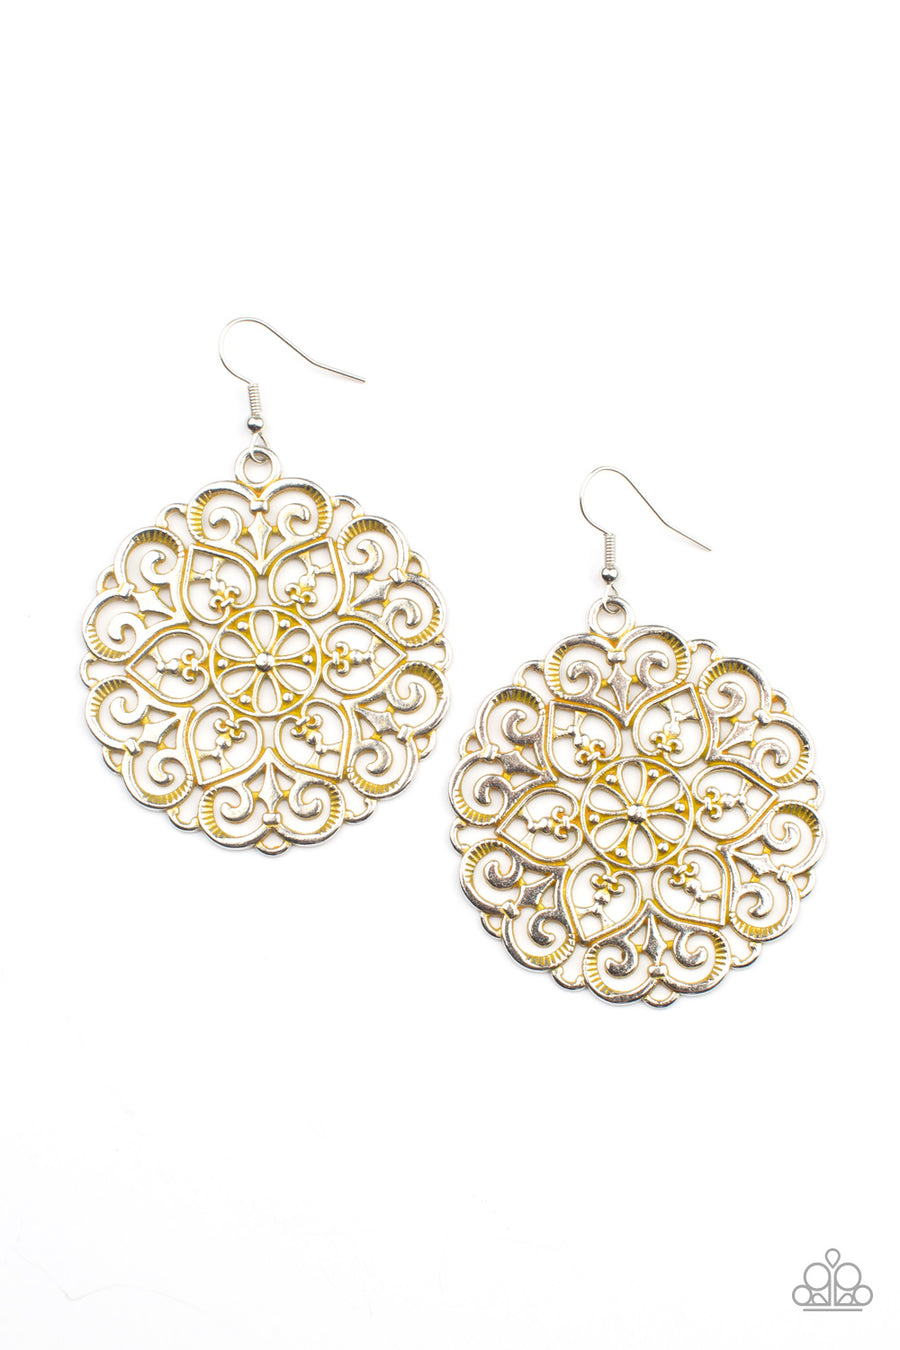 MANDALA Effect - Yellow Earrings - Paparazzi Accessories - Brushed in a rustic yellow finish, an oversized mandala-like silver frame swings from the ear for a seasonal pop of color.